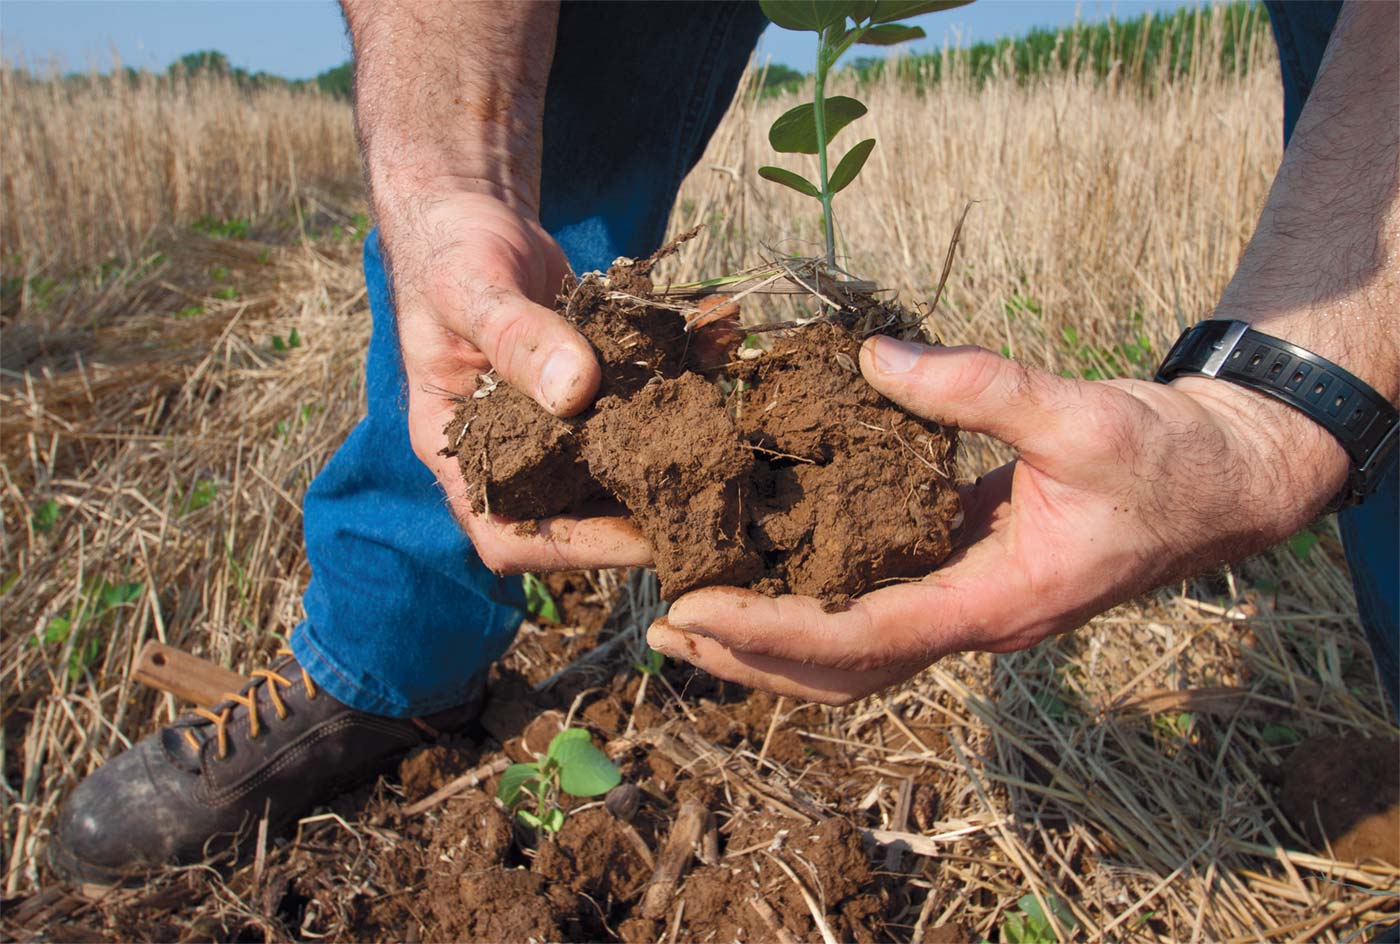 It’s all about the soil as USDA Natural Resources Conservation Service employee does an inspection. USDA photos